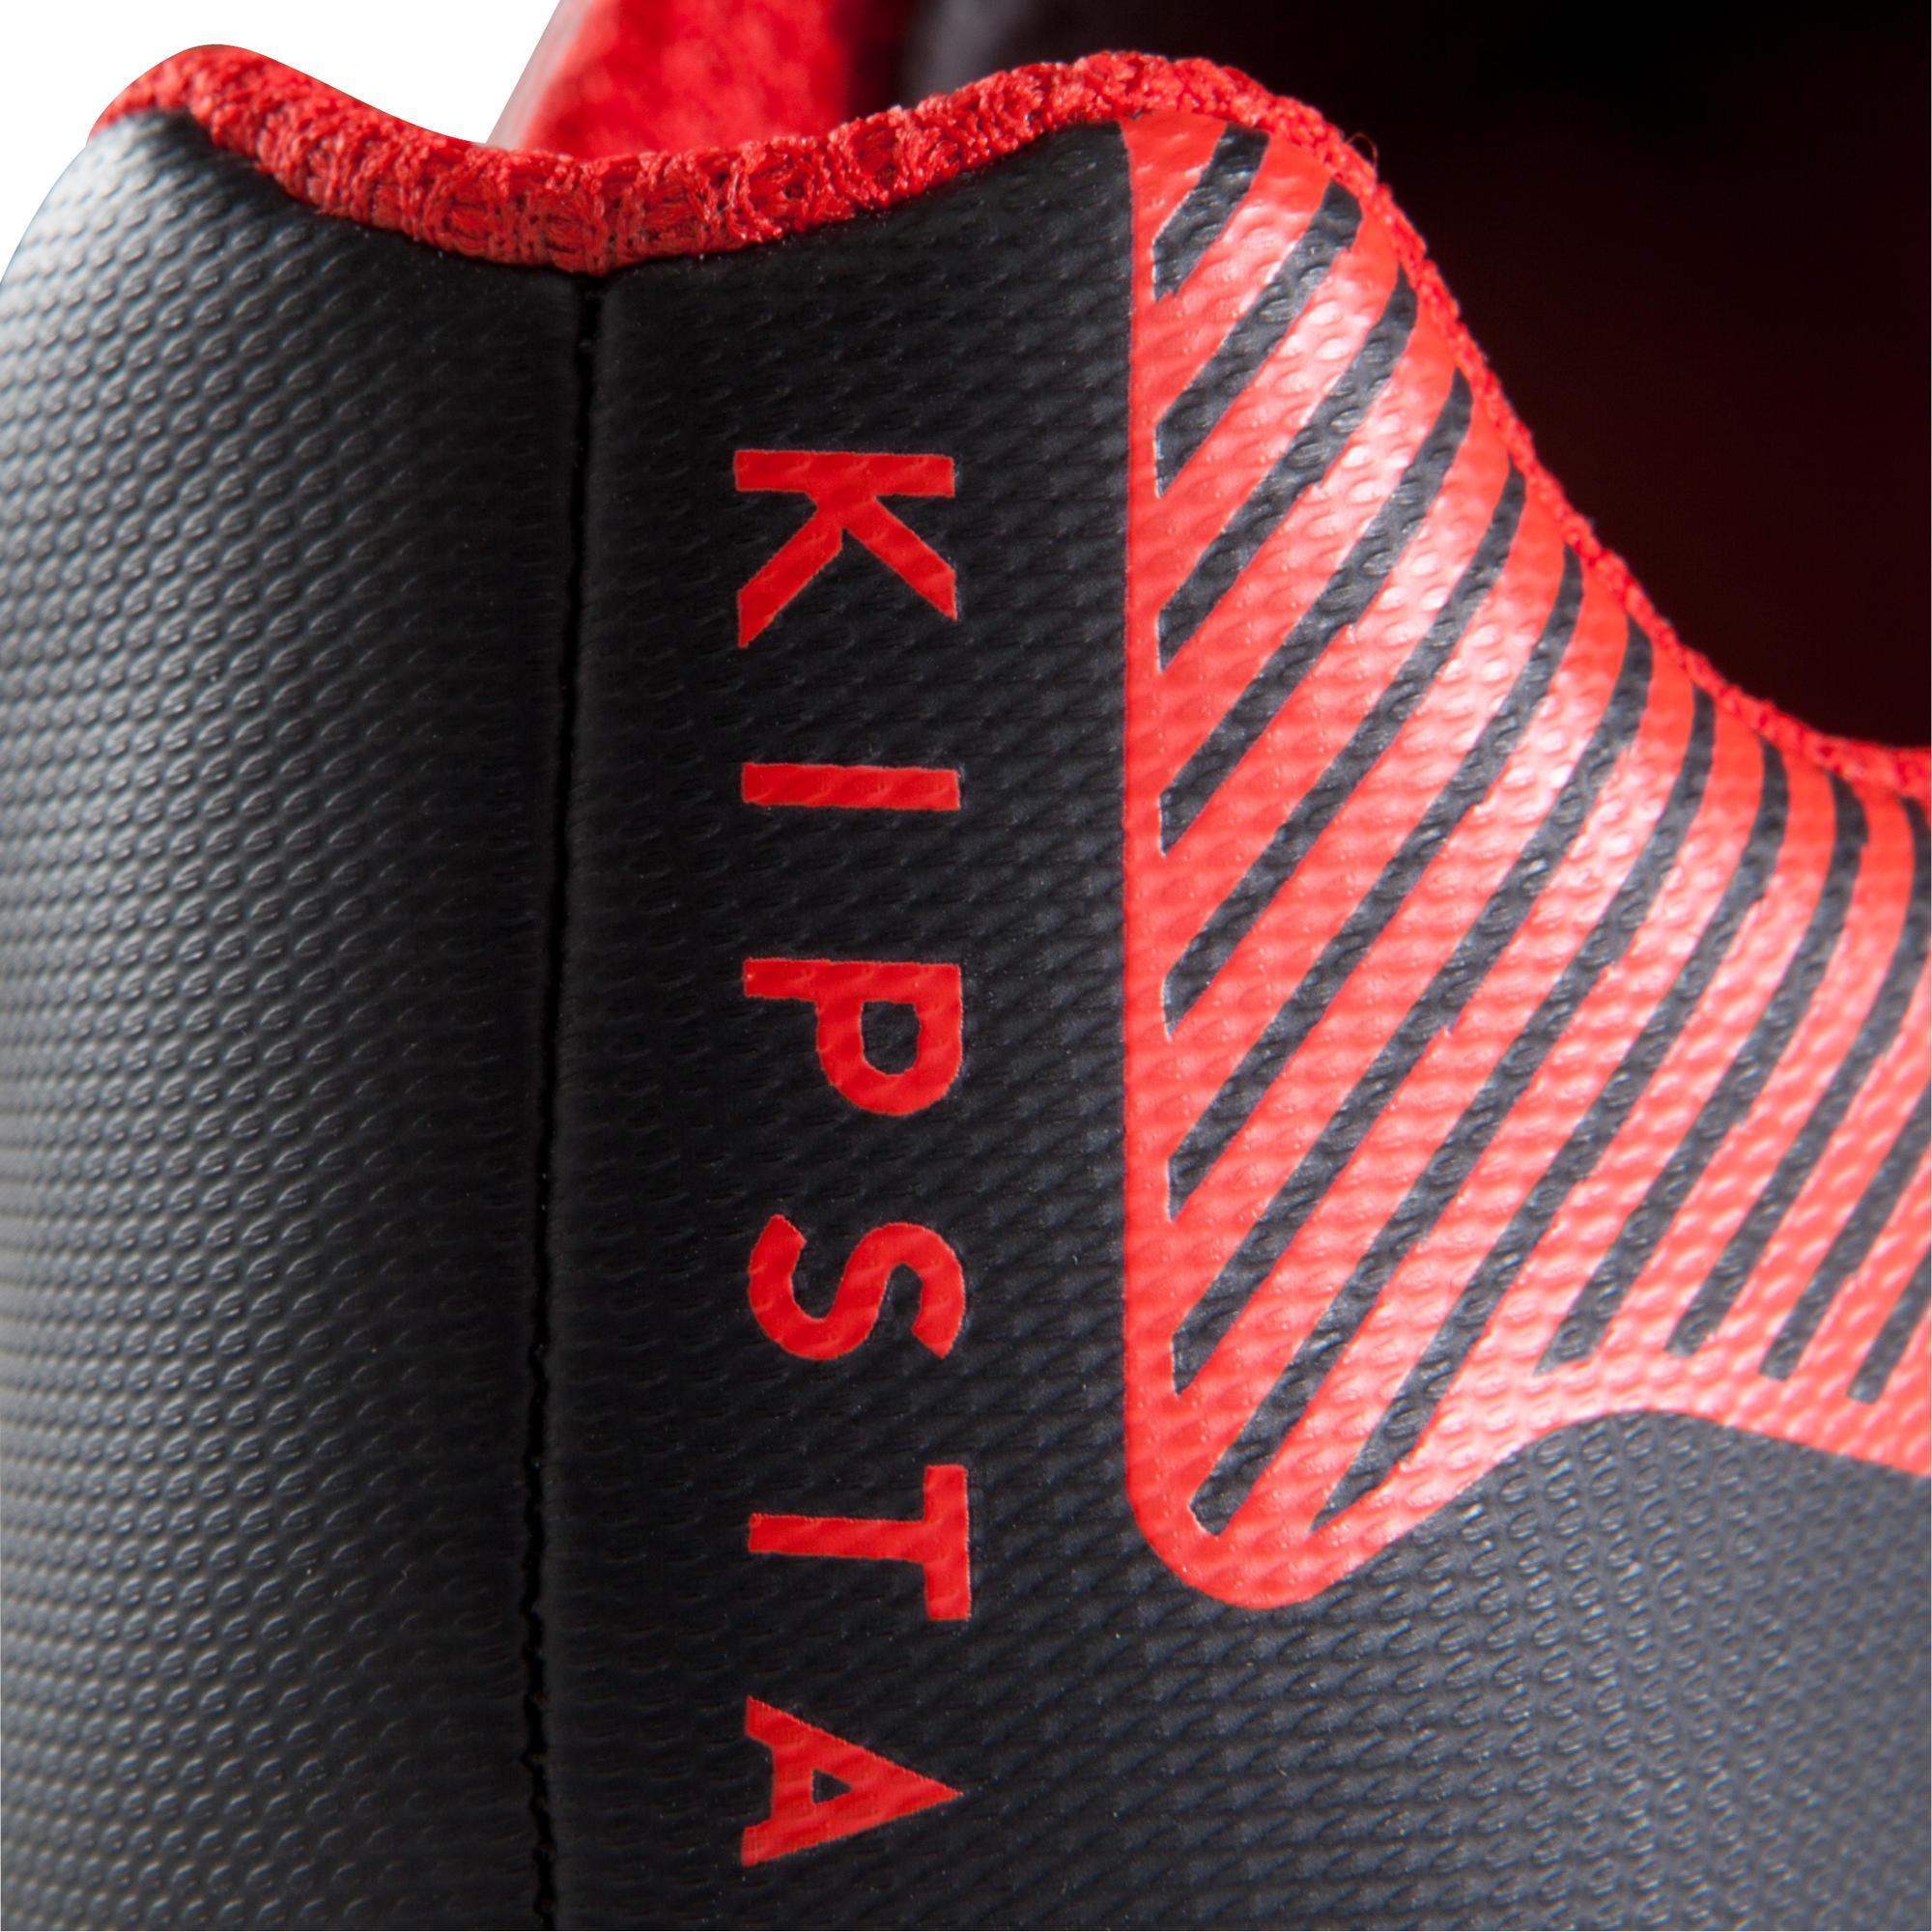 kipsta football shoes red